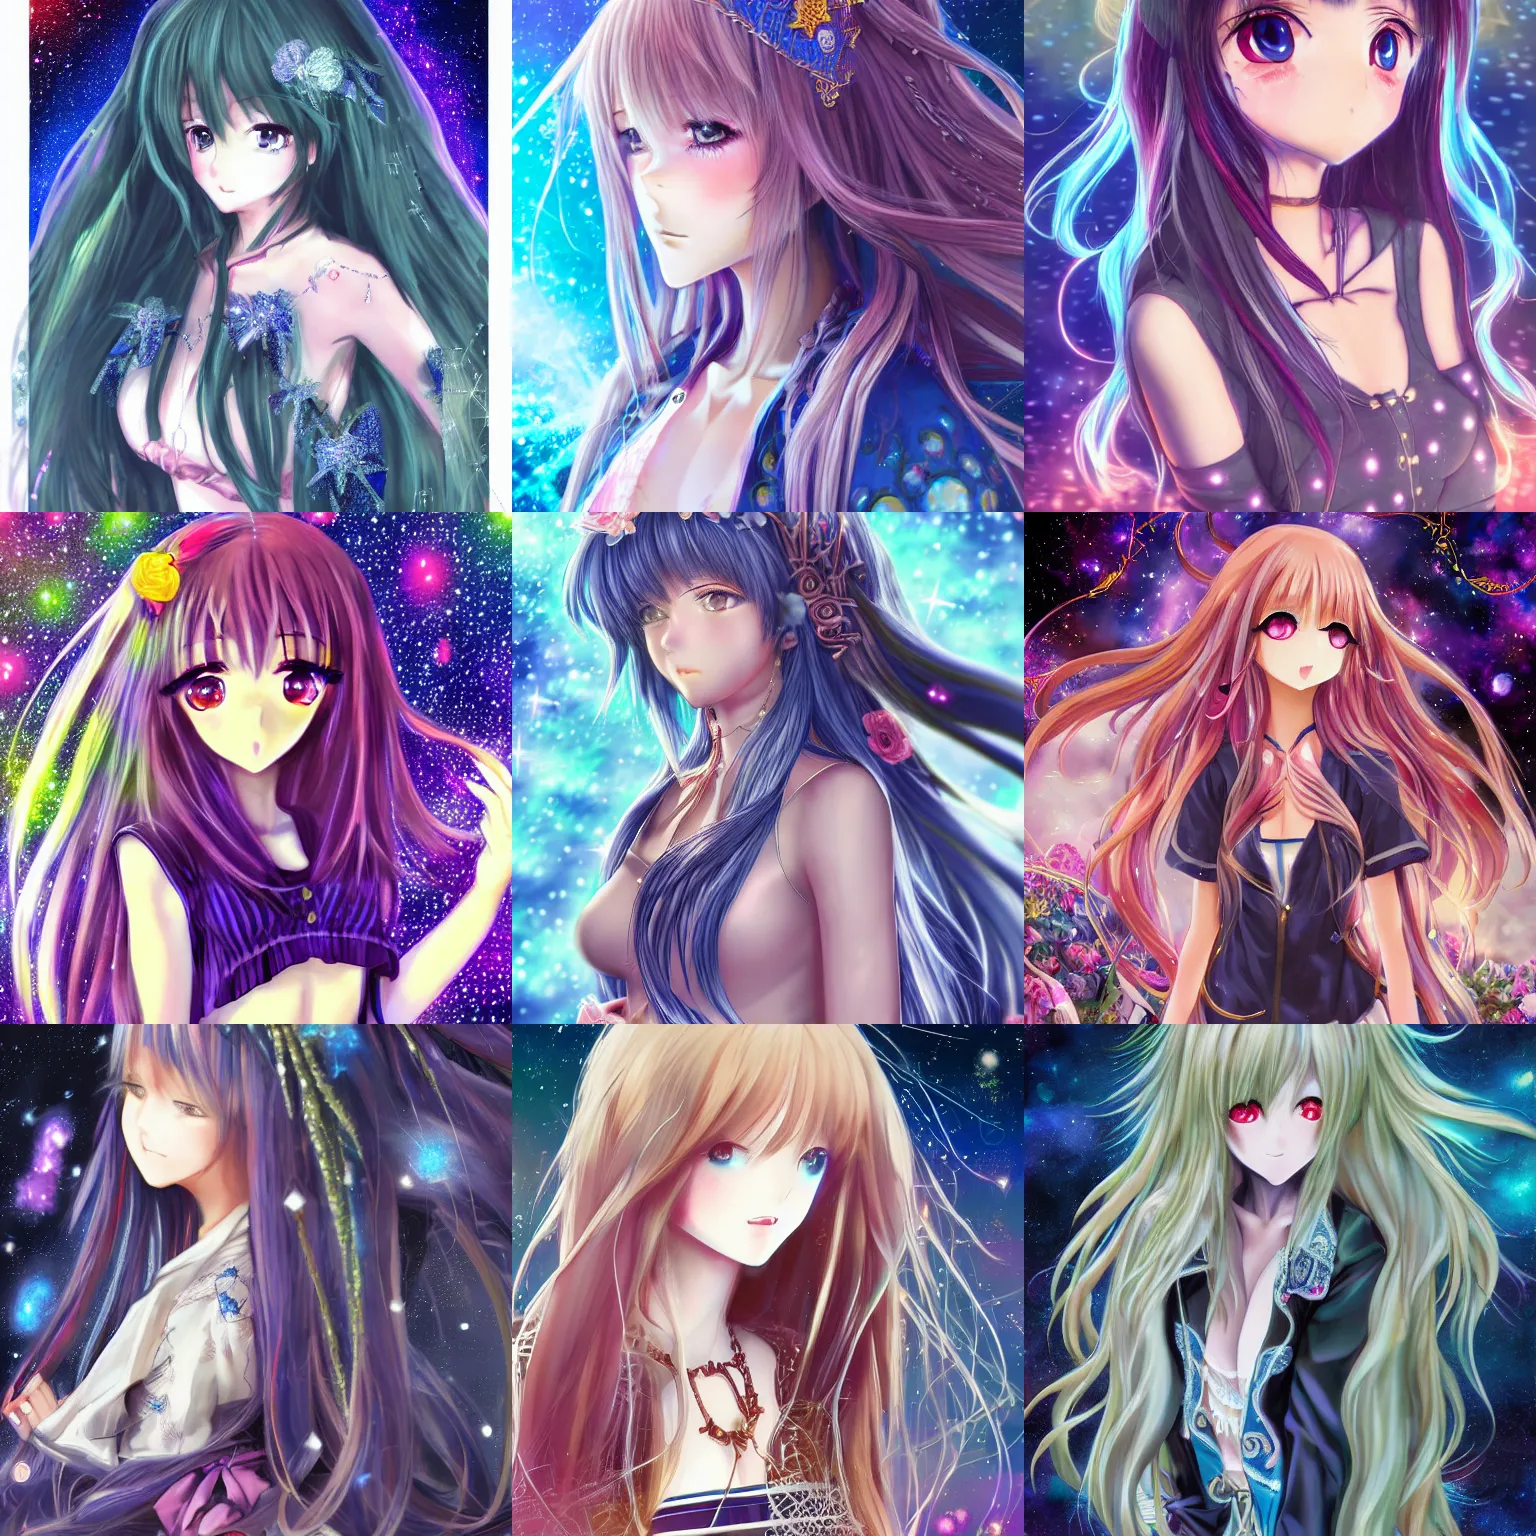 Prompt: anime girl with clothes with cosmic, magic long hair, super - resolution, hsl, 2 - bit, vr, uniform, nano, senary, rtx, insanely detailed and intricate, hypermaximalist, elegant, ornate, hyper realistic, super detailed, full body, full body shot, full image, full art